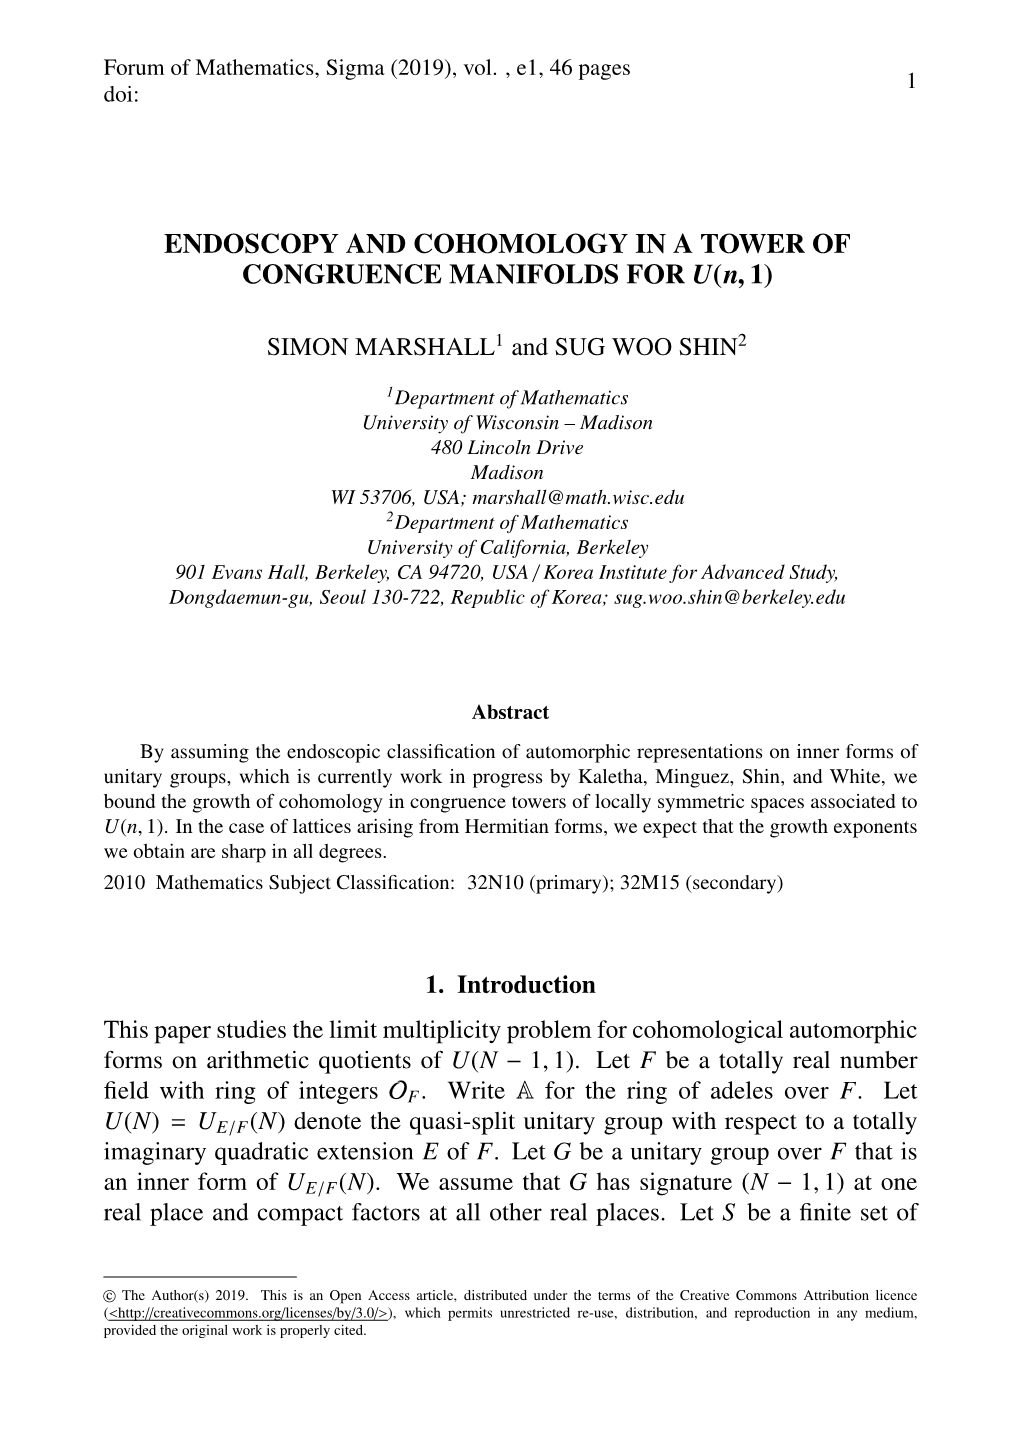 ENDOSCOPY and COHOMOLOGY in a TOWER of CONGRUENCE MANIFOLDS for U(N, 1)